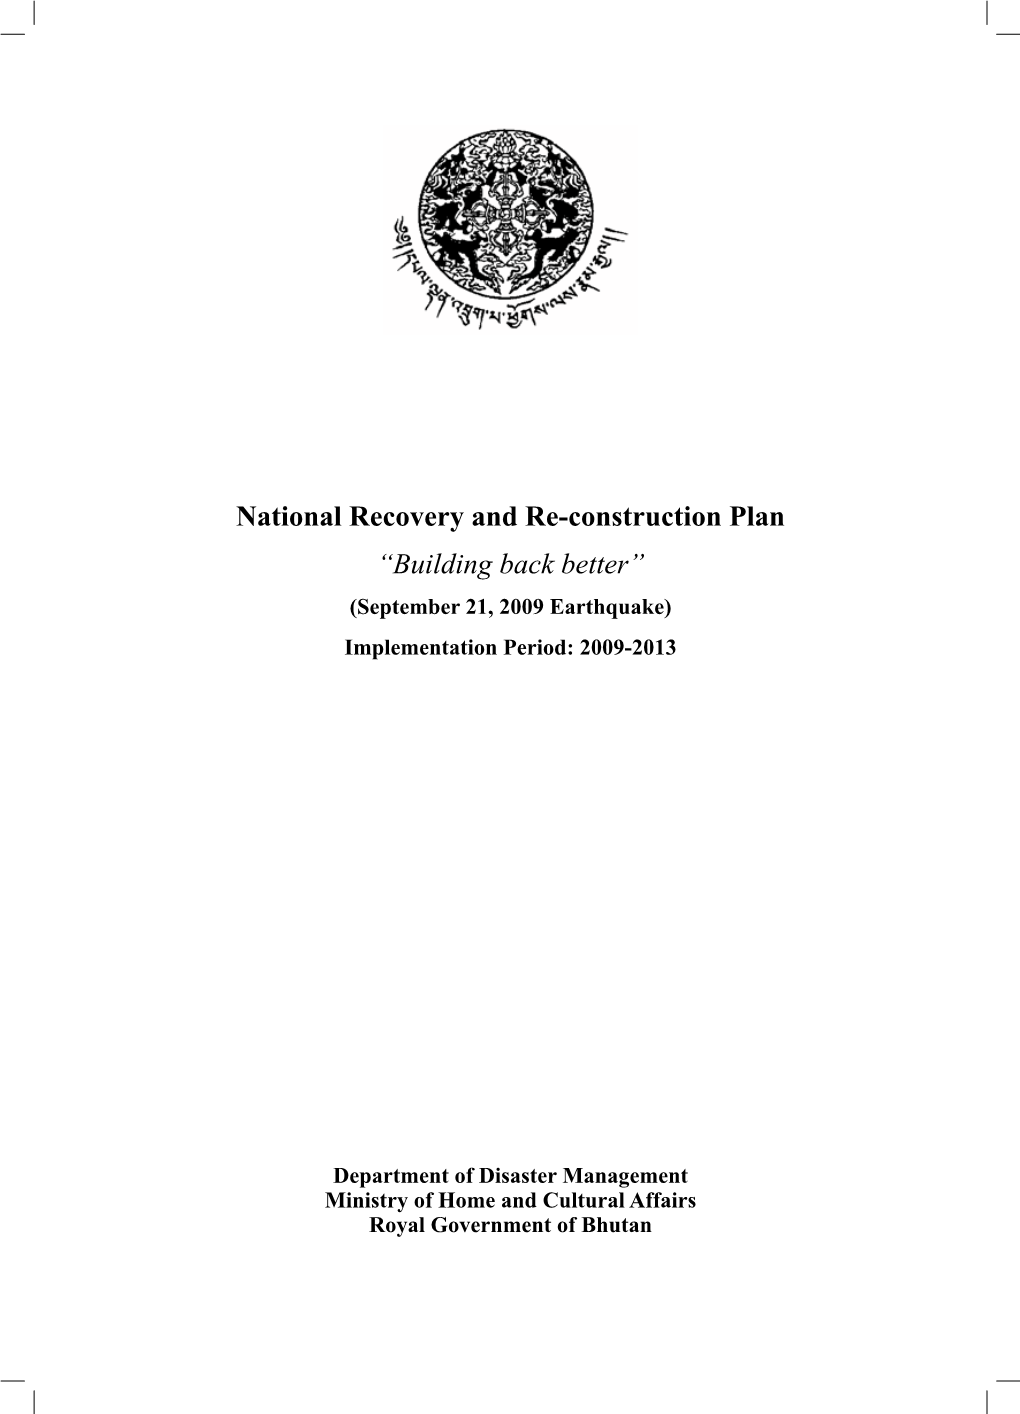 National Recovery and Reconstruction Plan for 2009